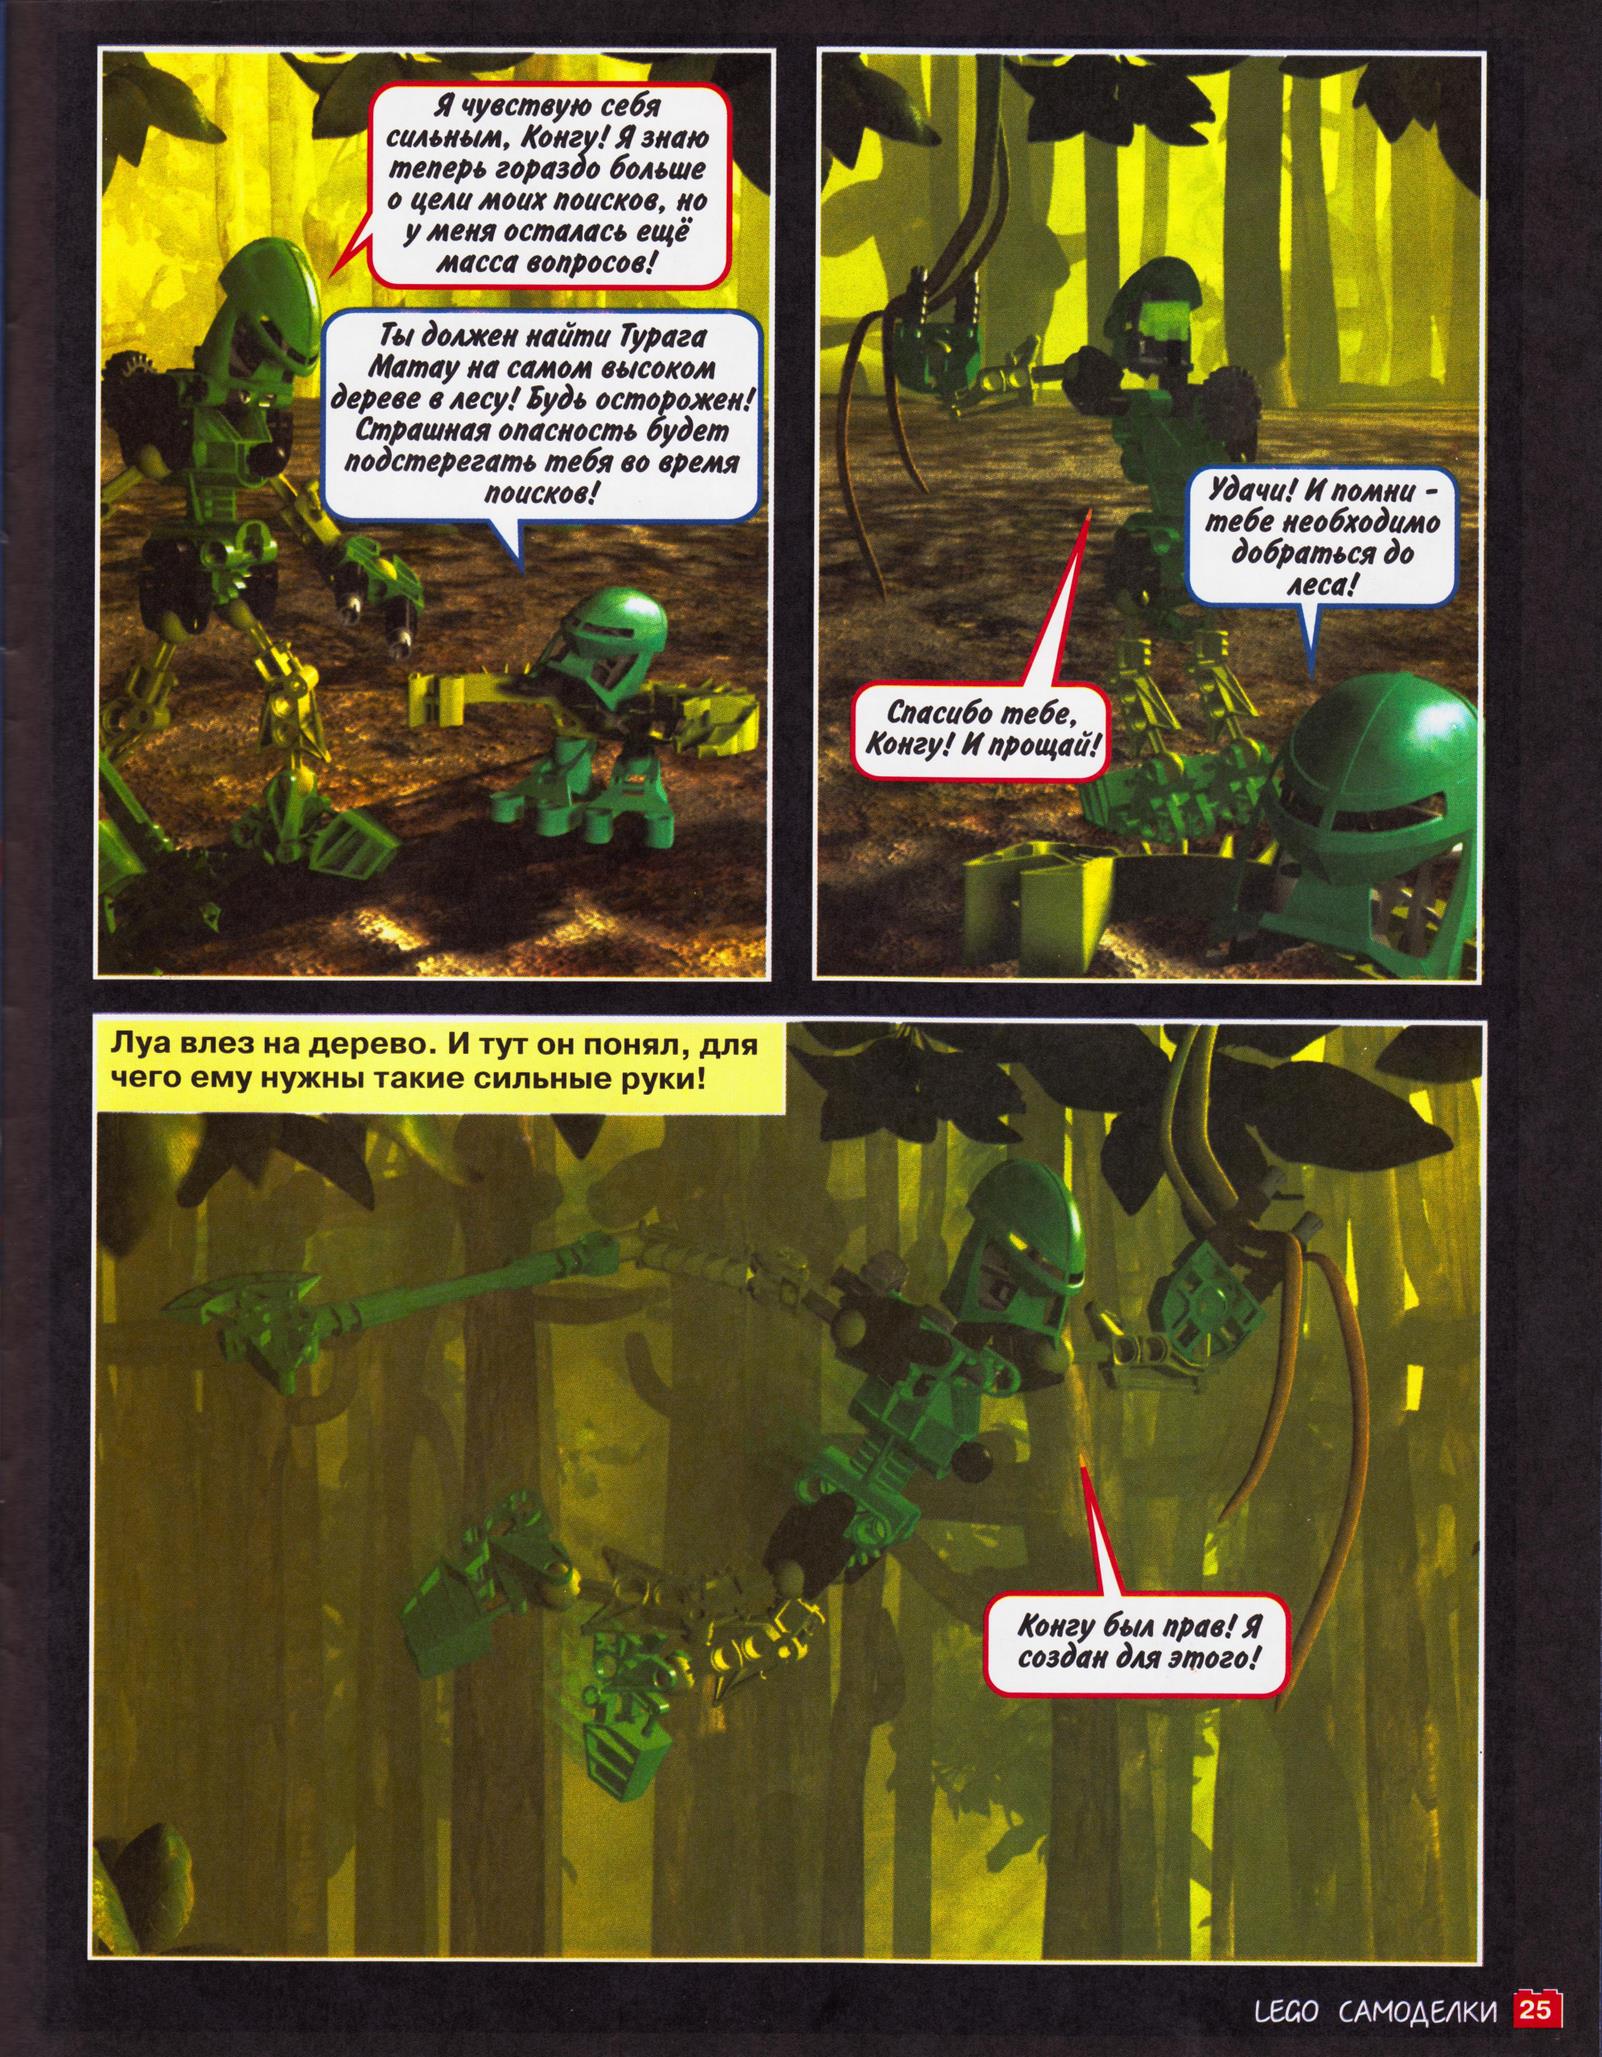 http://biosector01.com/wiki/images/4/4a/The_Legend_of_Lewa_Part_One_Page_Four.jpg